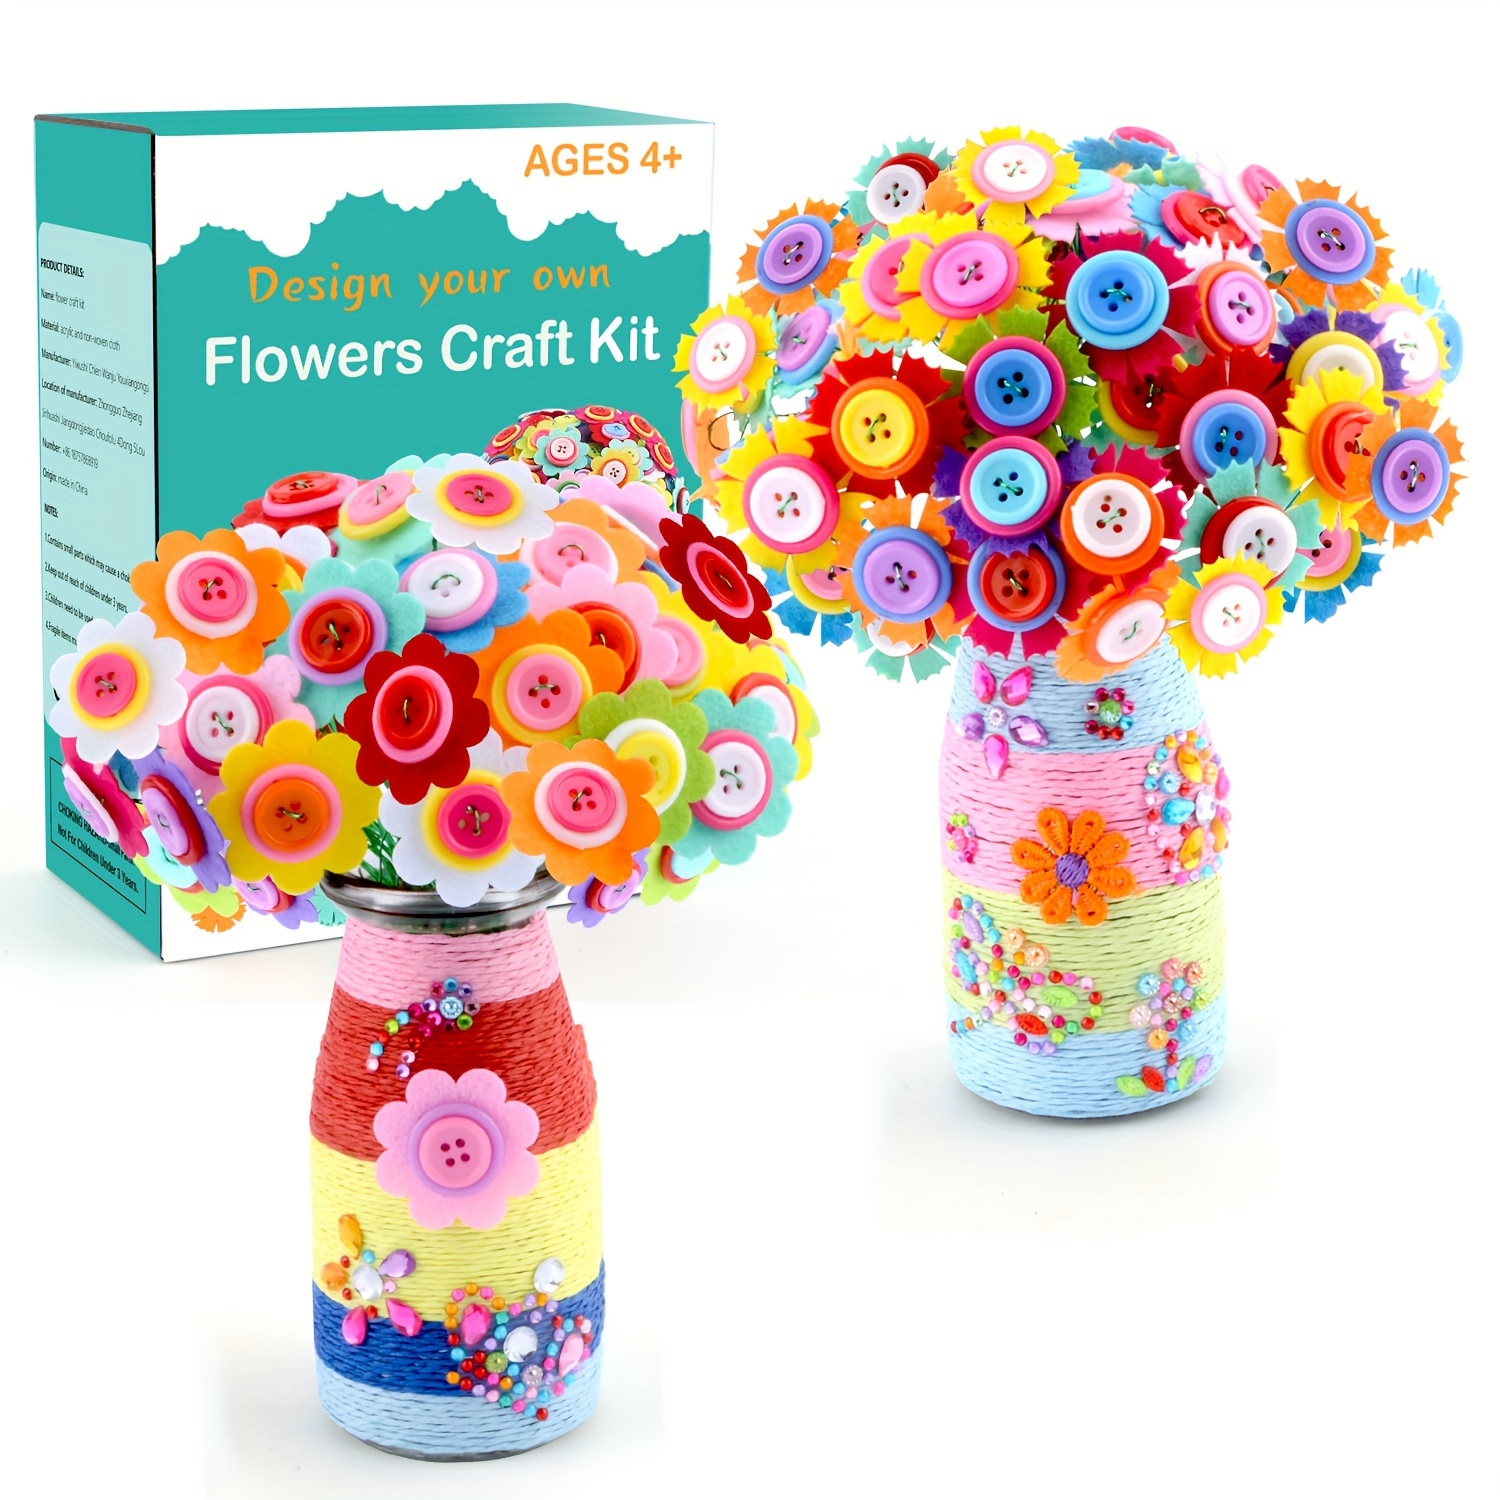 

Crafts For Girls Ages 4-12 Gift Make Your Own Flower Bouquet With Buttons Felt Flowers, Vase Art And Craft For Children - Diy Activity For Boys & Girls Age 6 7 8 9 10 11 12 Year Old